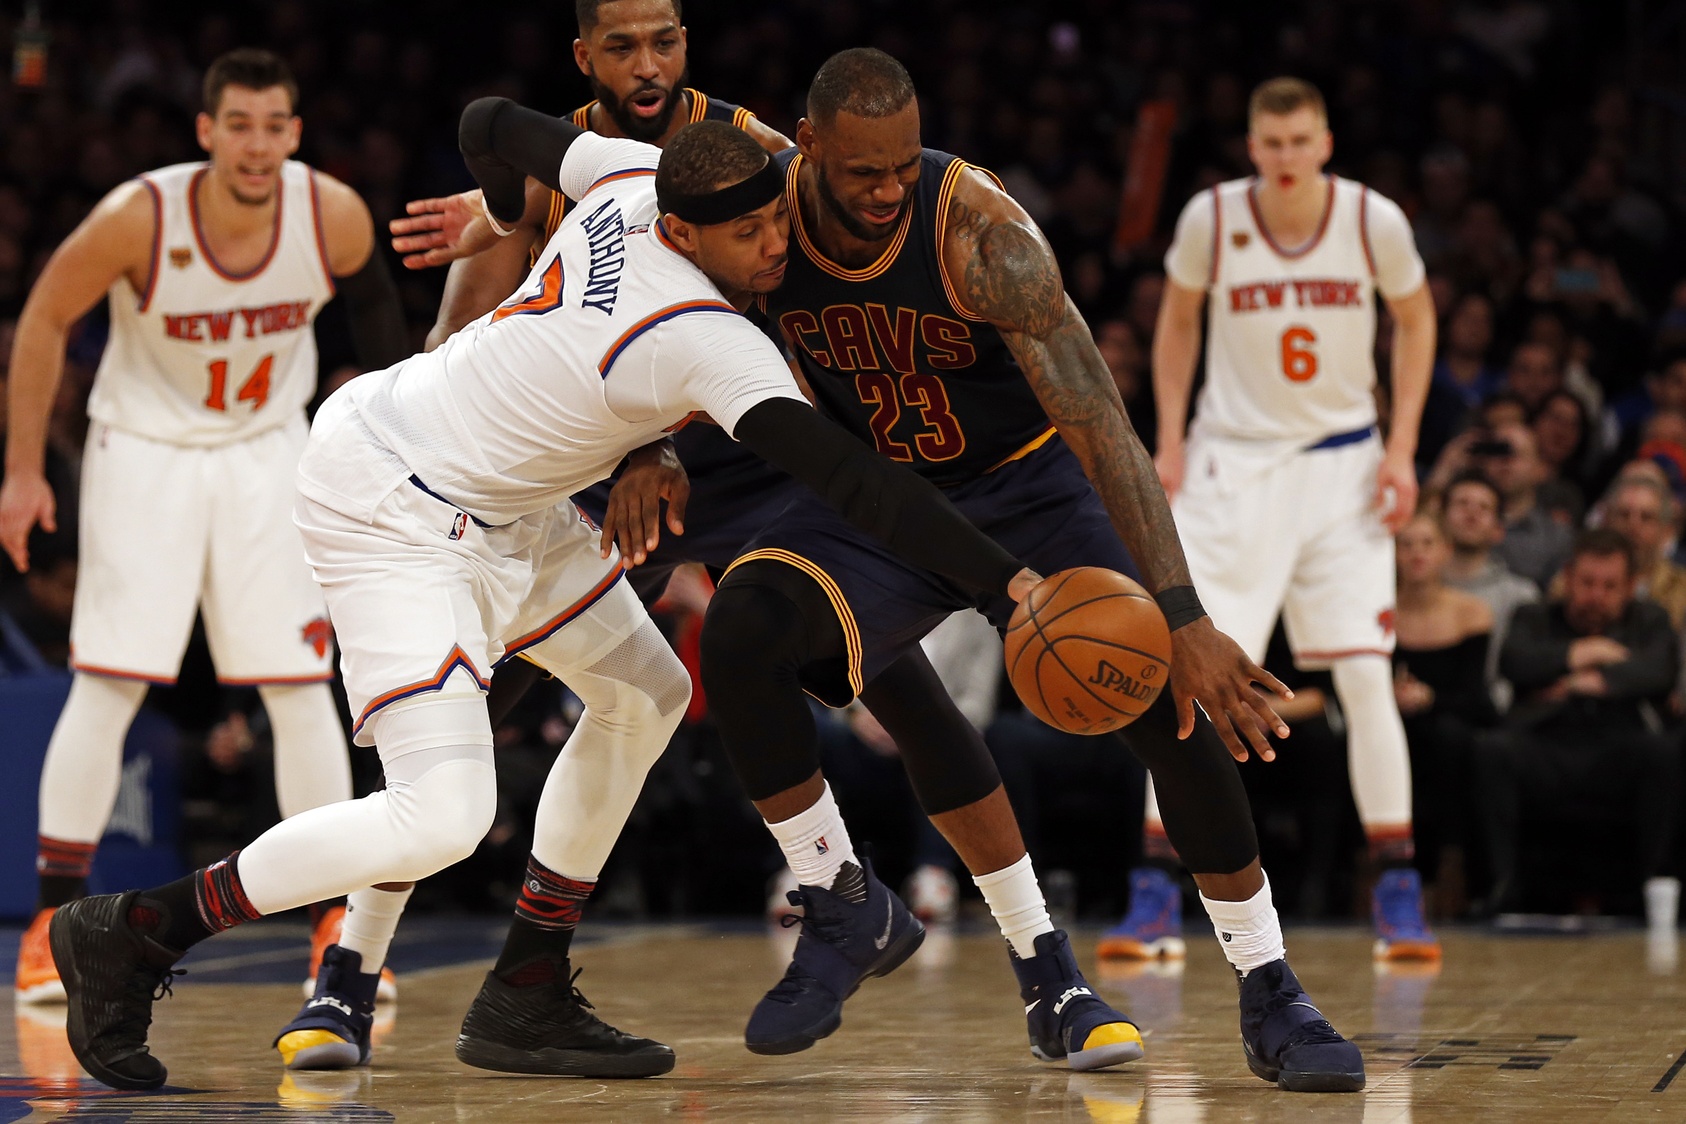 Fourth quarter rally is too little too late as New York Knicks fall to Cavs 2